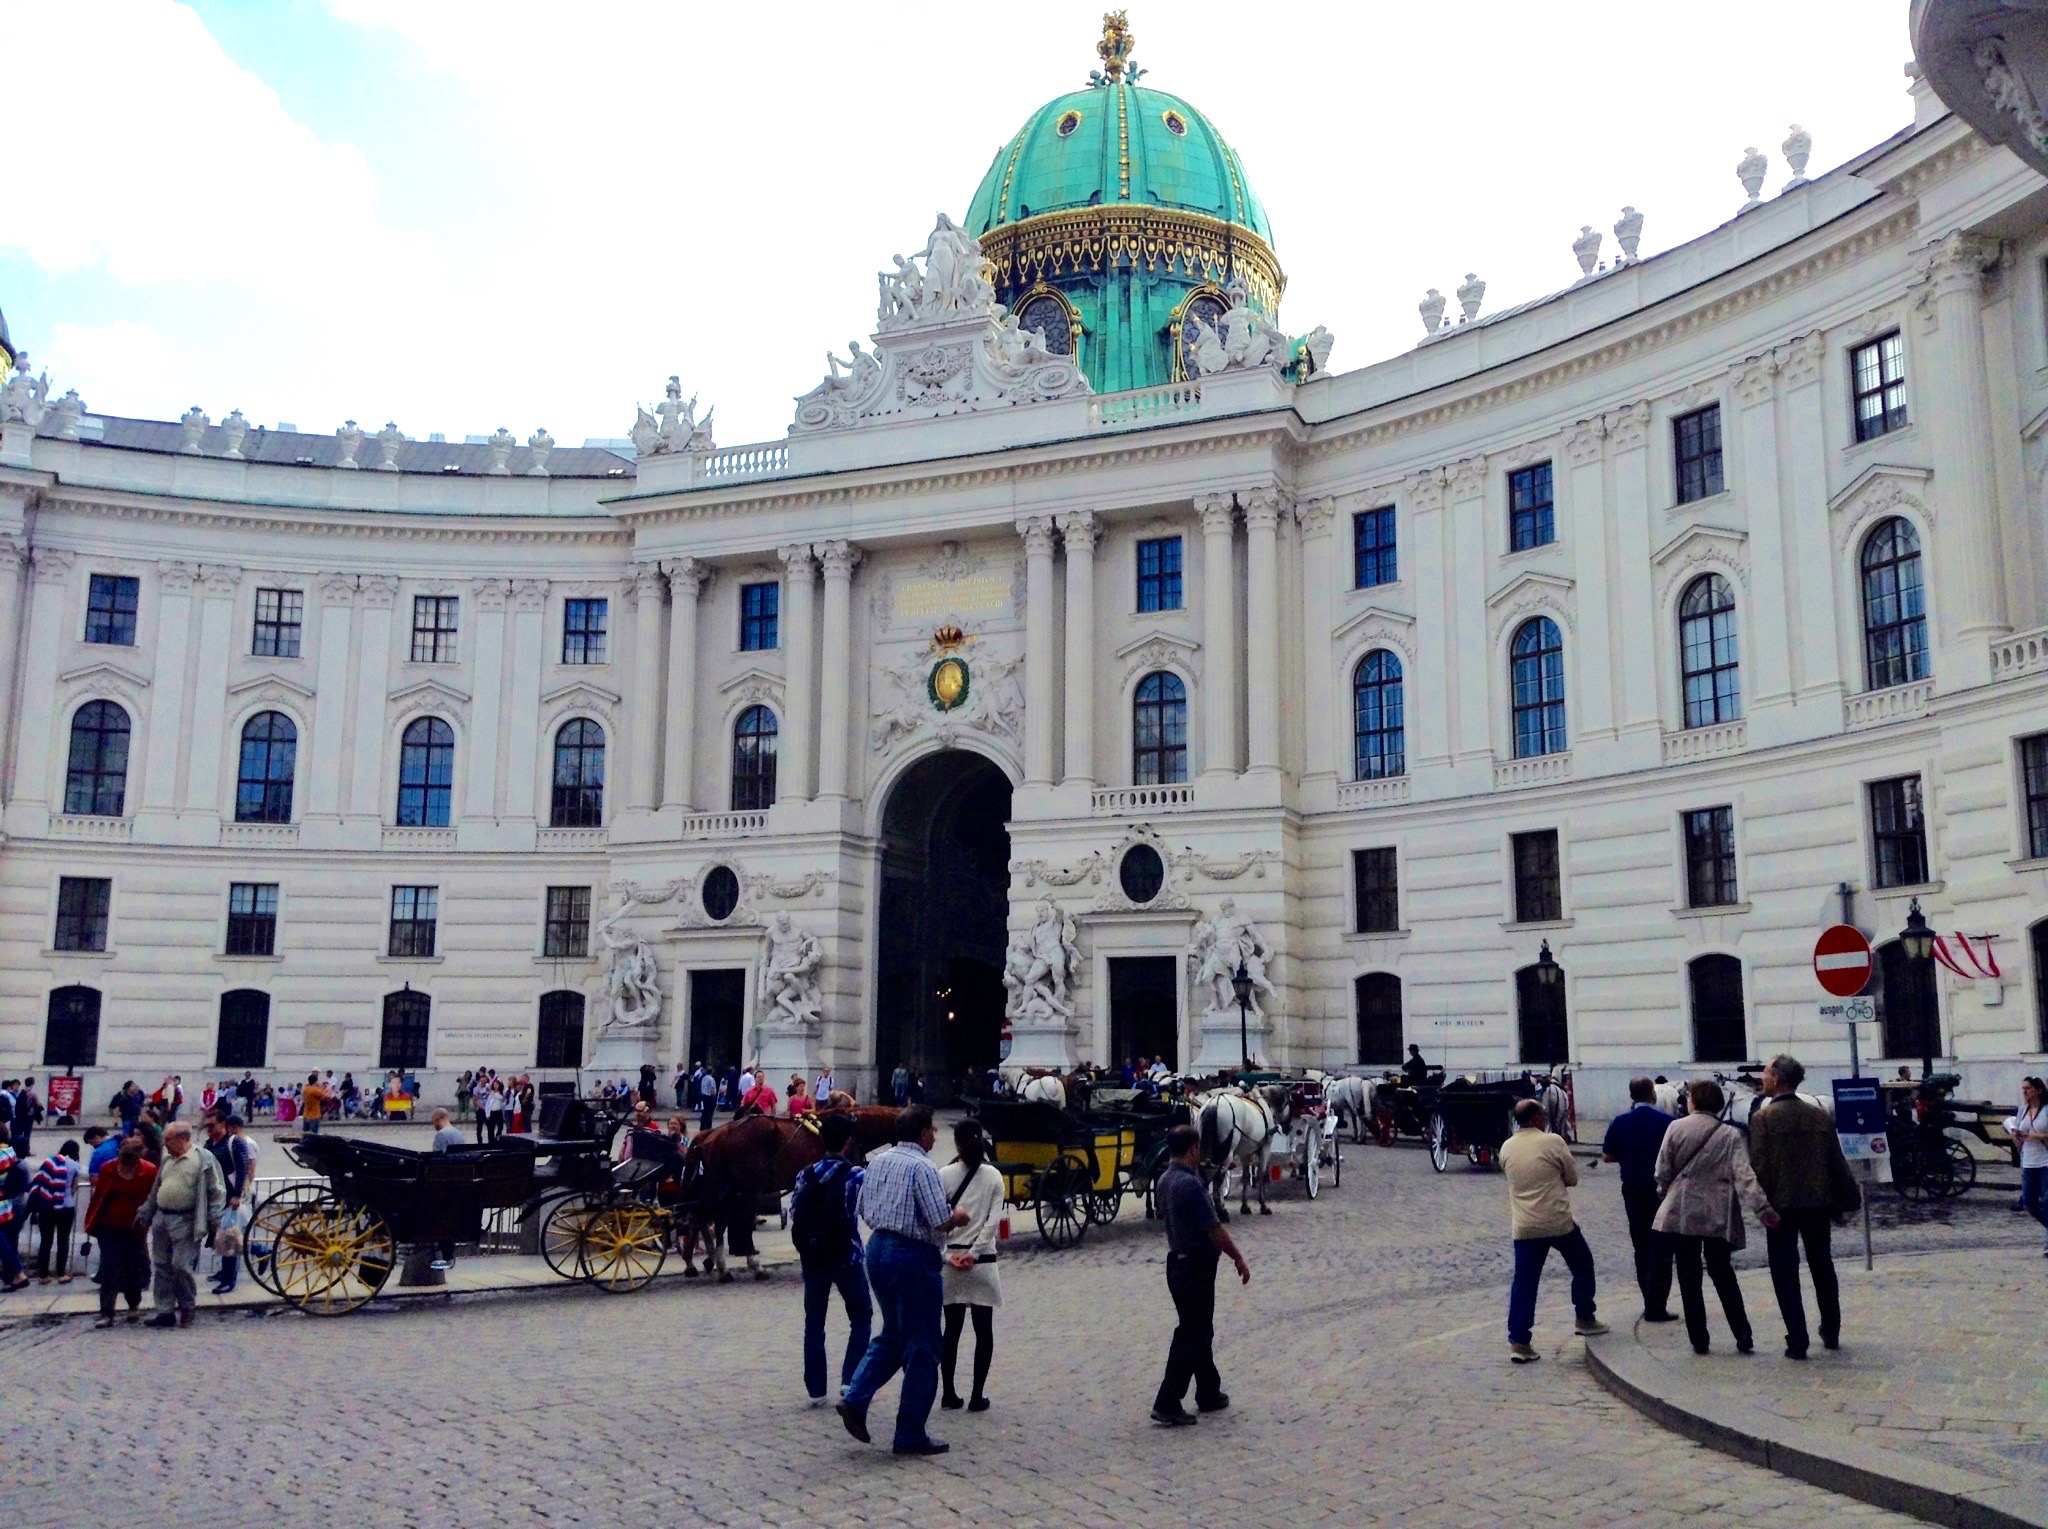 Hofburg, once the center of the Habsburg monarchy, now serves as the capital of Austria.